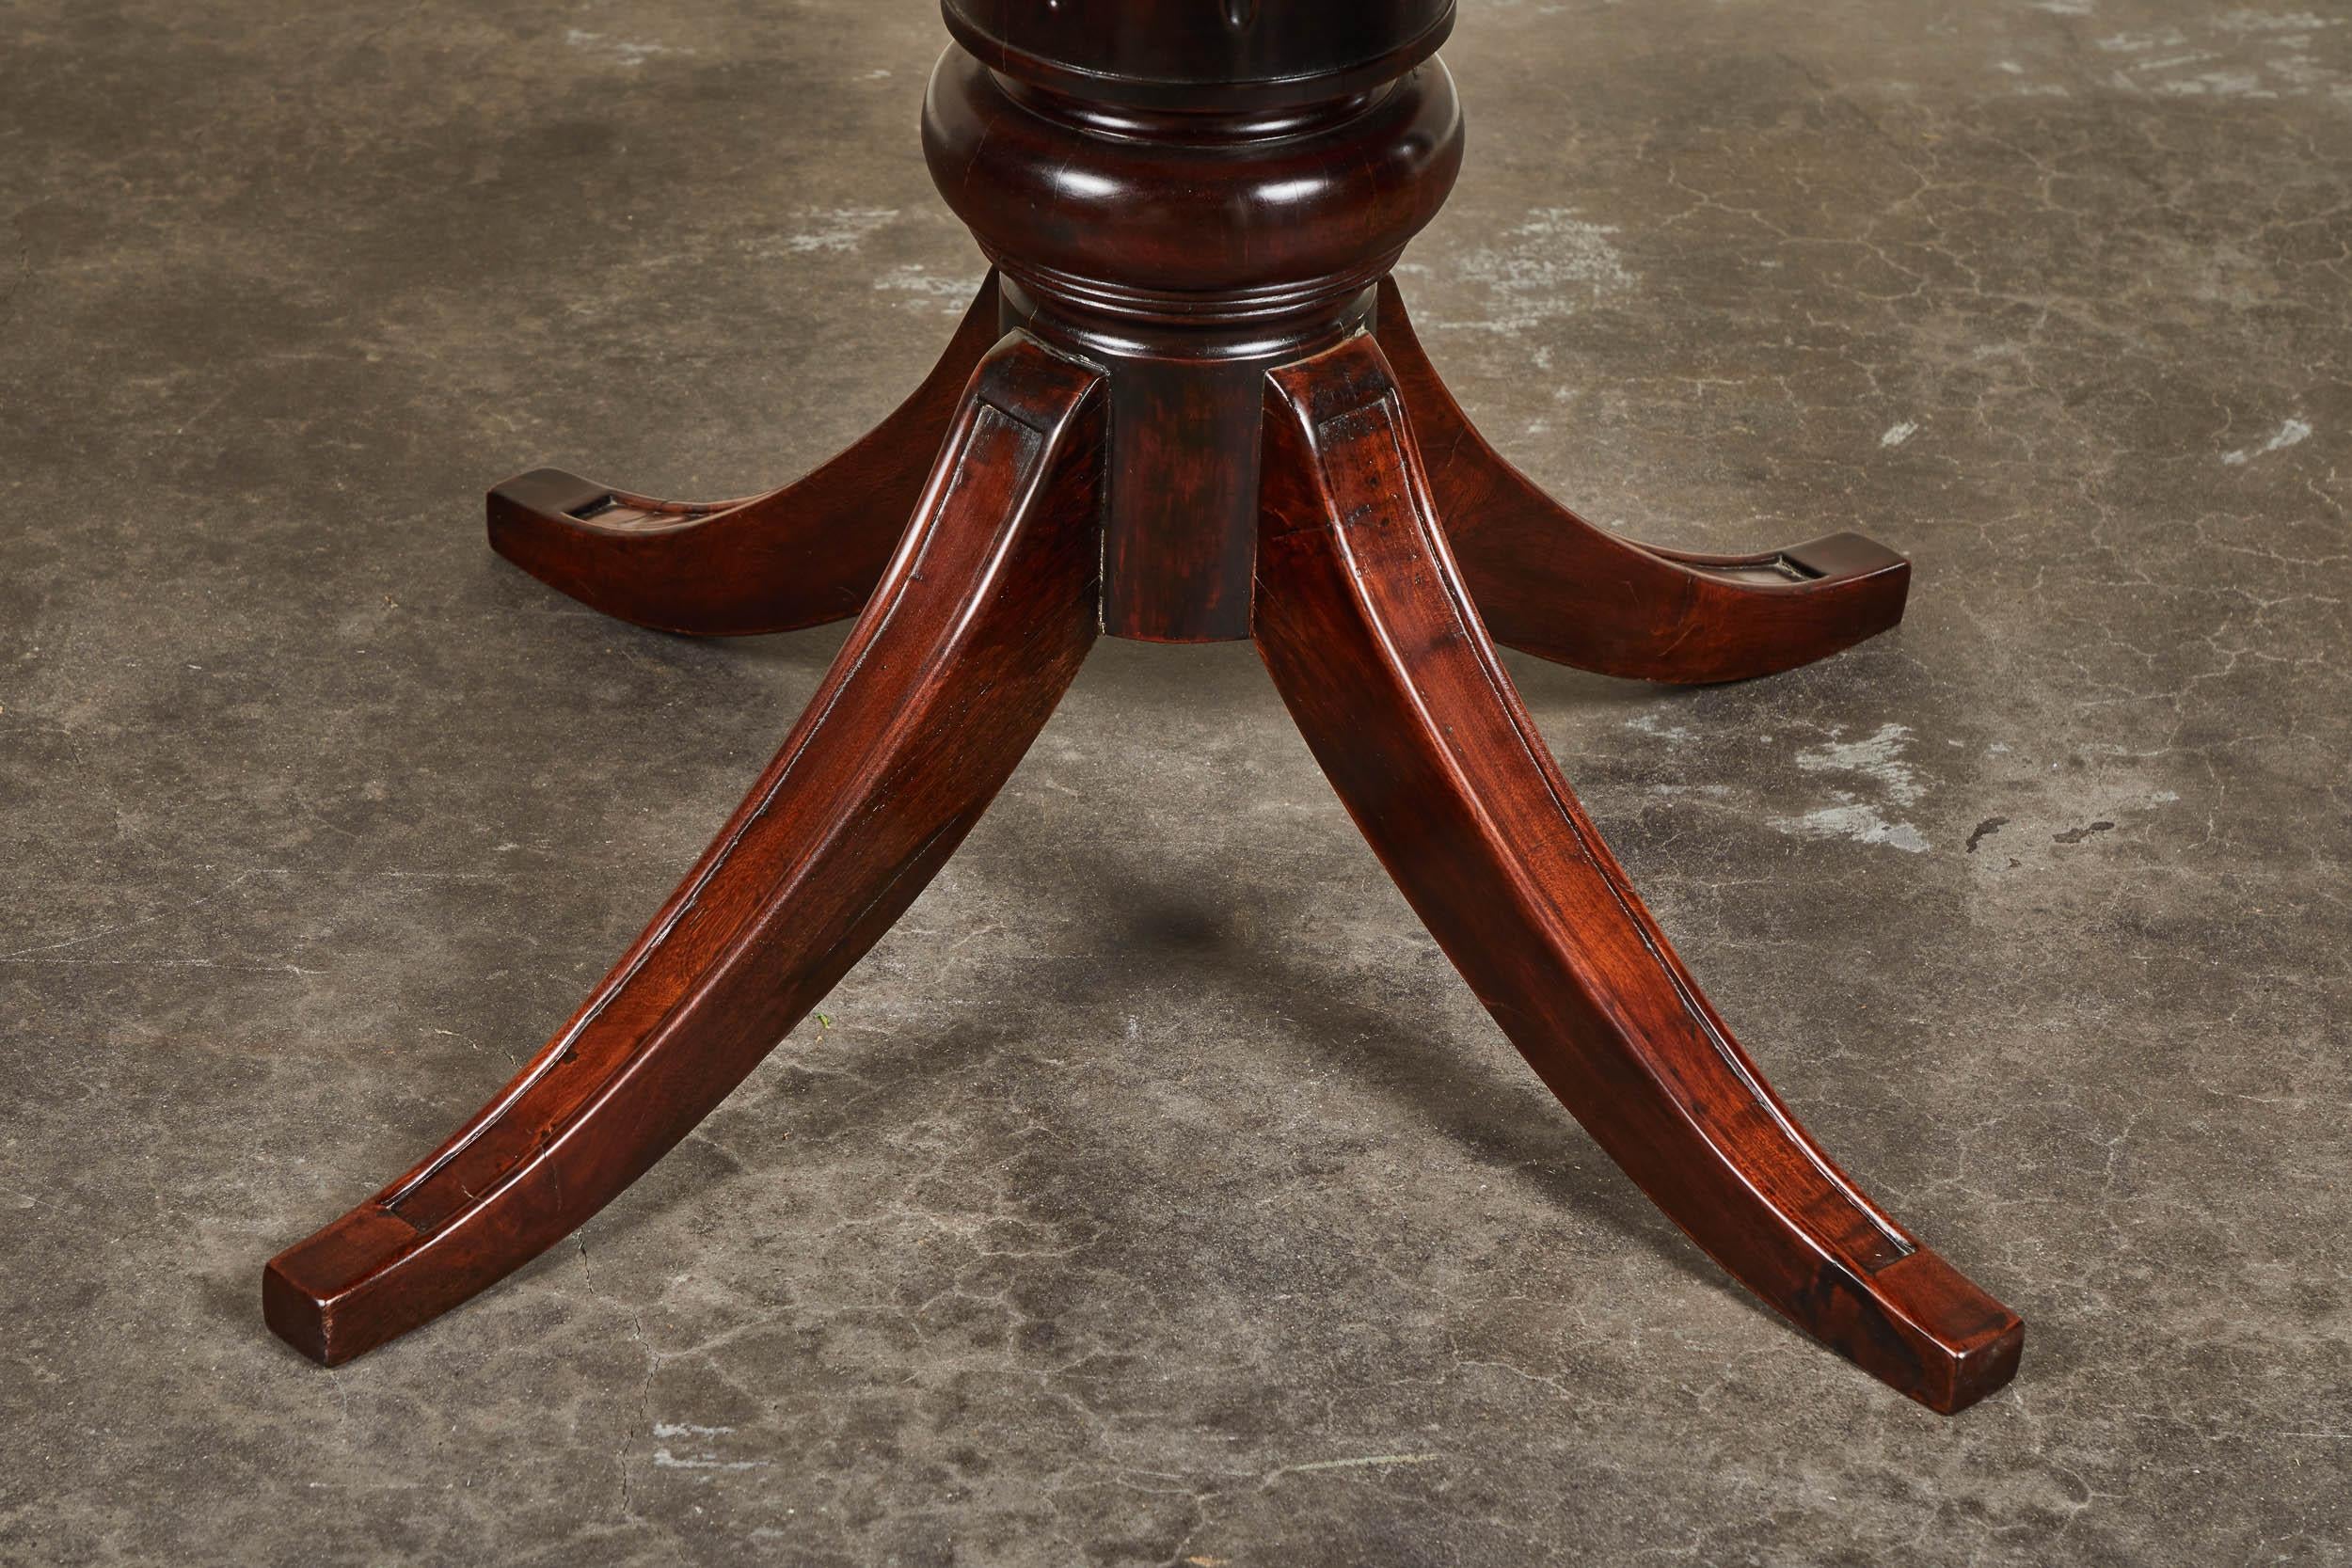 A 19th century French colonial drum table made of rosewood. Features five drawers and pedestal base.